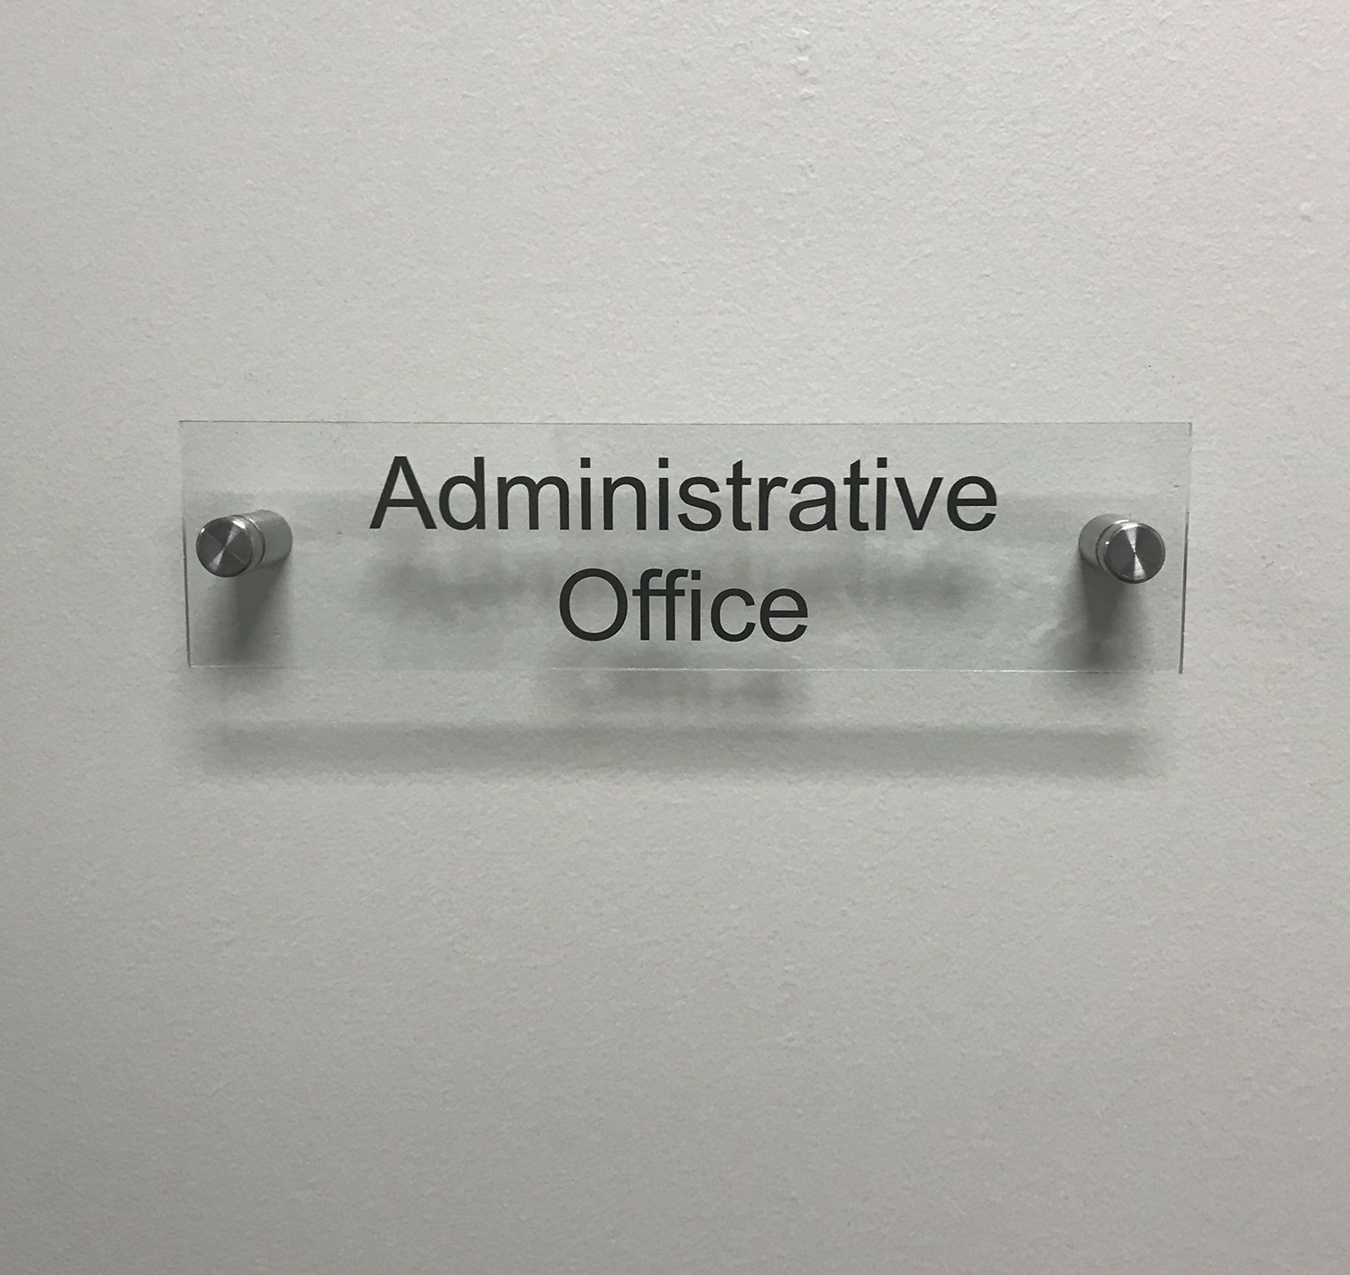 Administrative Office Acrylic Name Plate Sign 